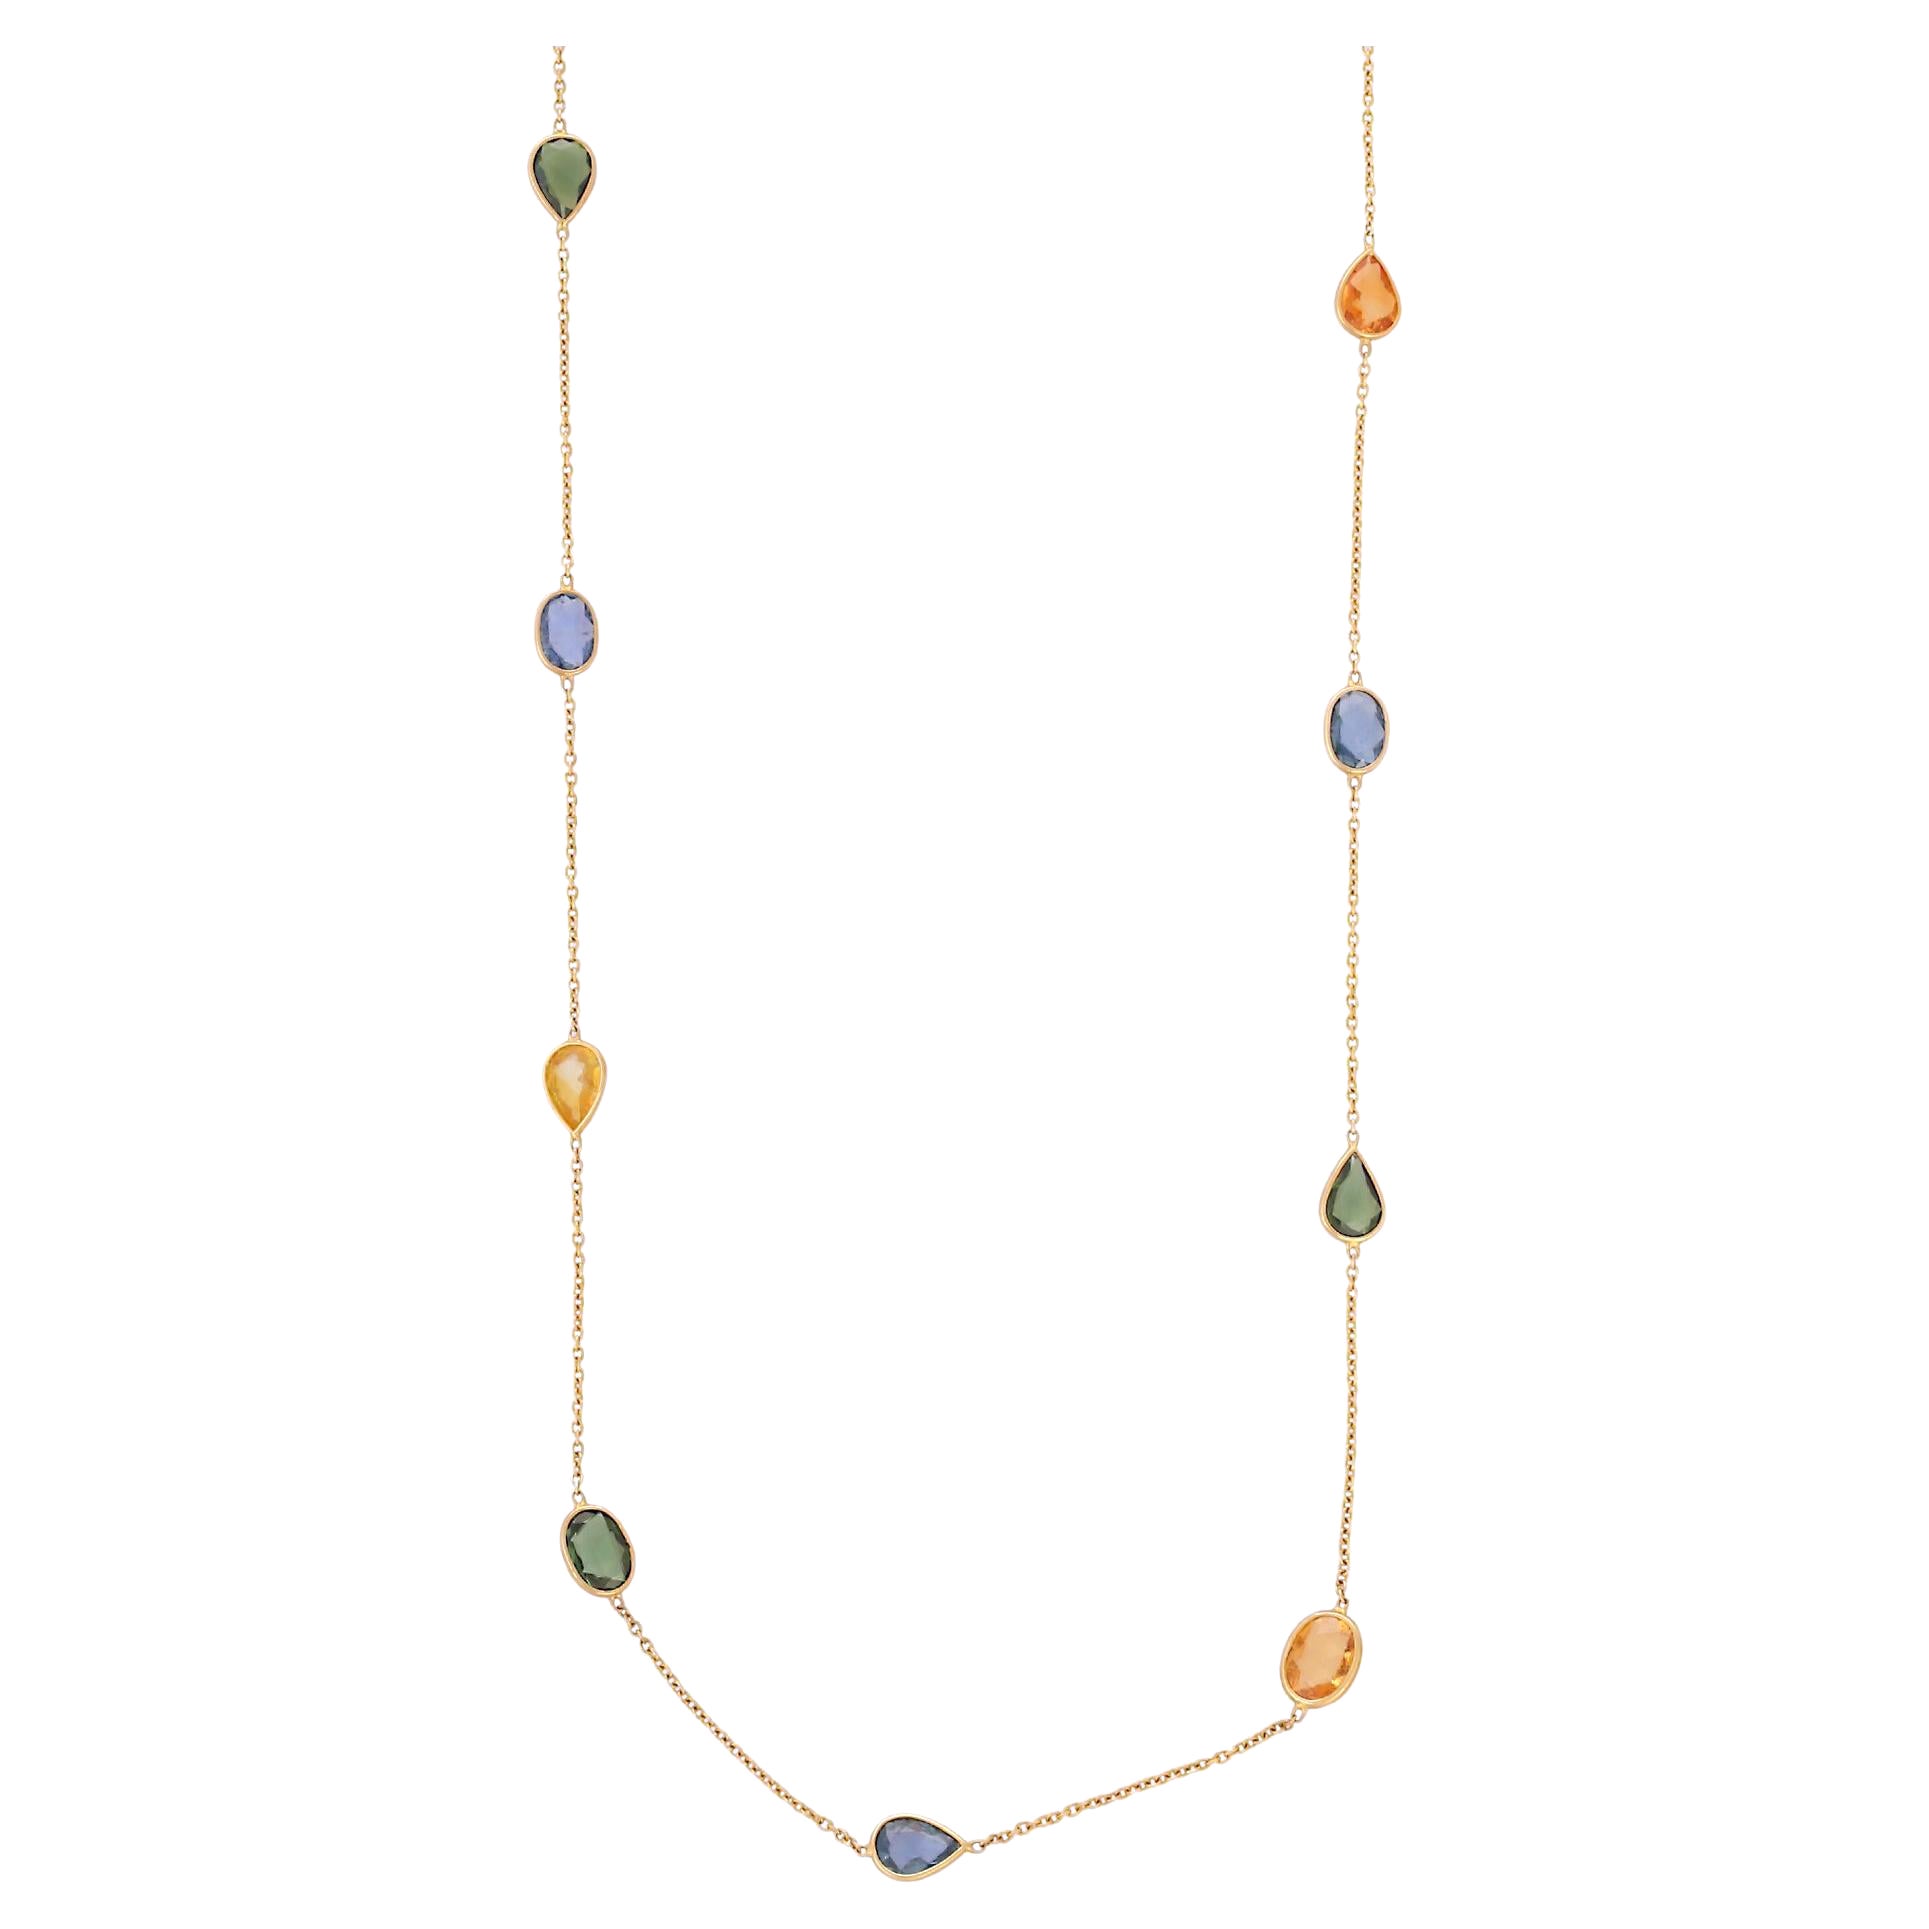 Modernist 12.16 Ct Multi Sapphire Chain Necklace in 18K Yellow Gold